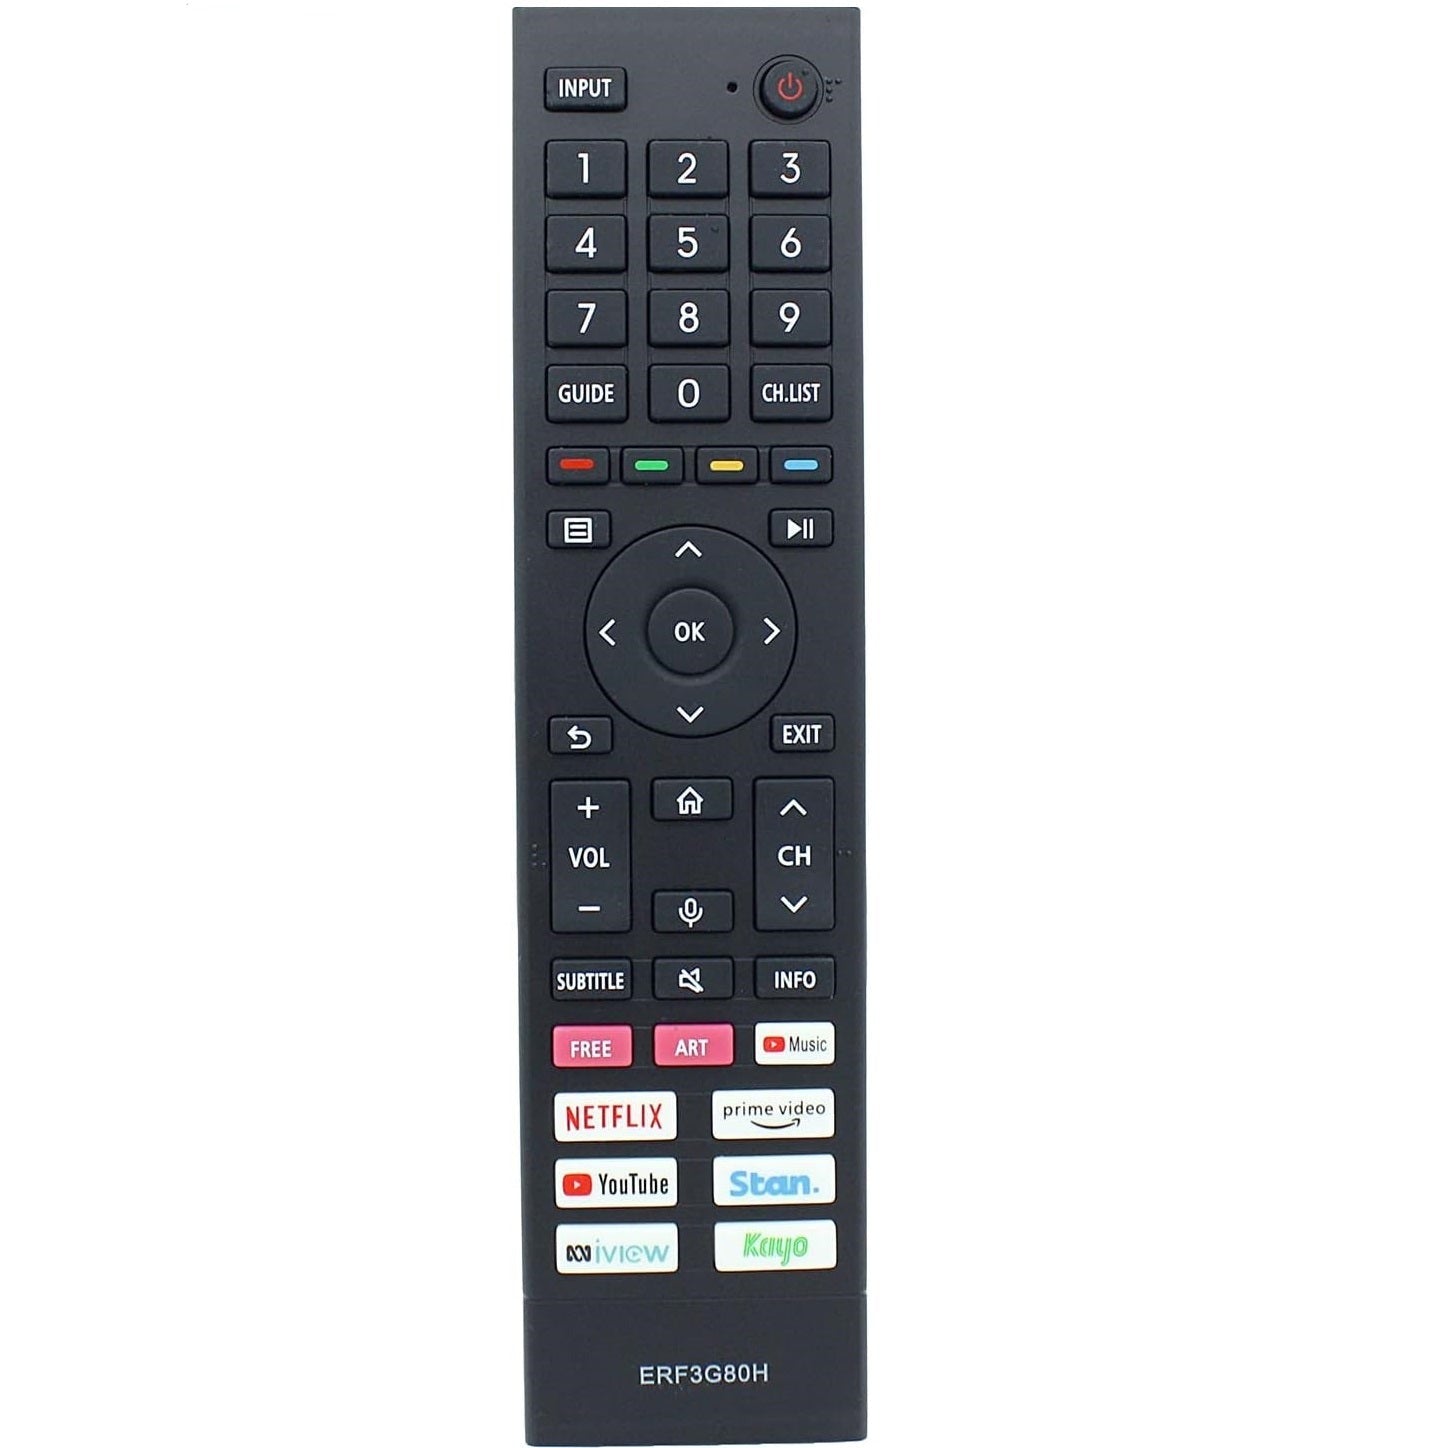 Hisense ERF3G80H Smart TV Replacement Remote Control - Remotes this Arvo